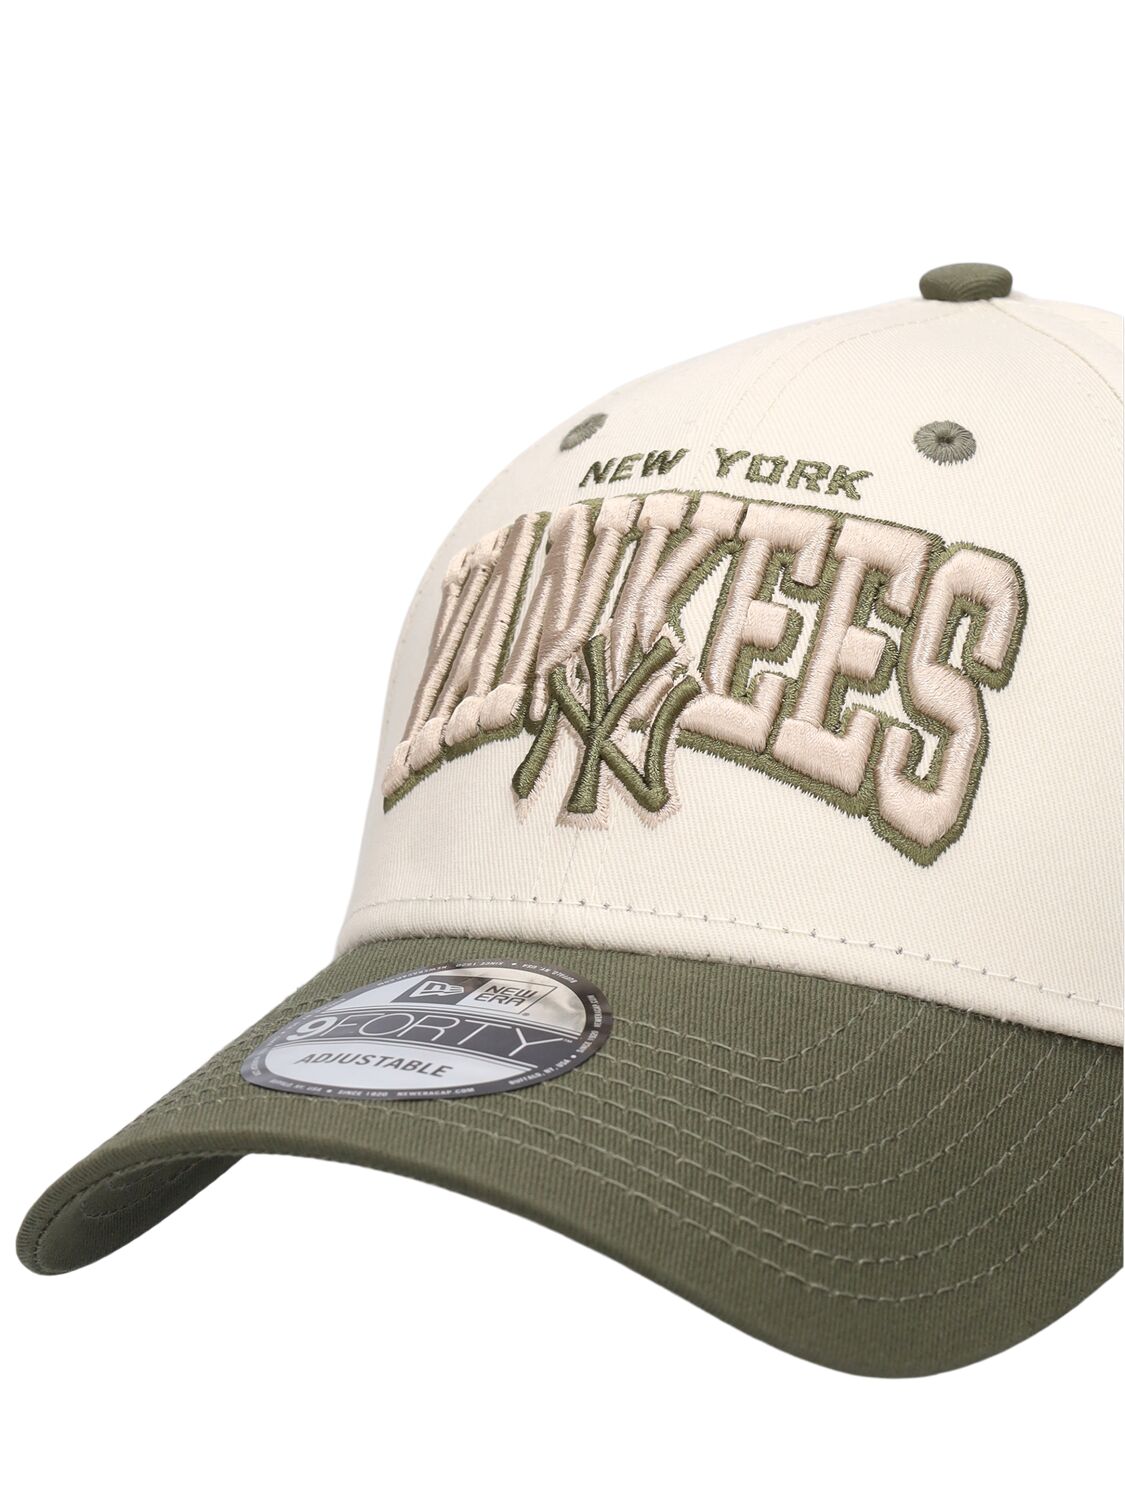 NY YANKEES WHITE CROWN 9FORTY帽子